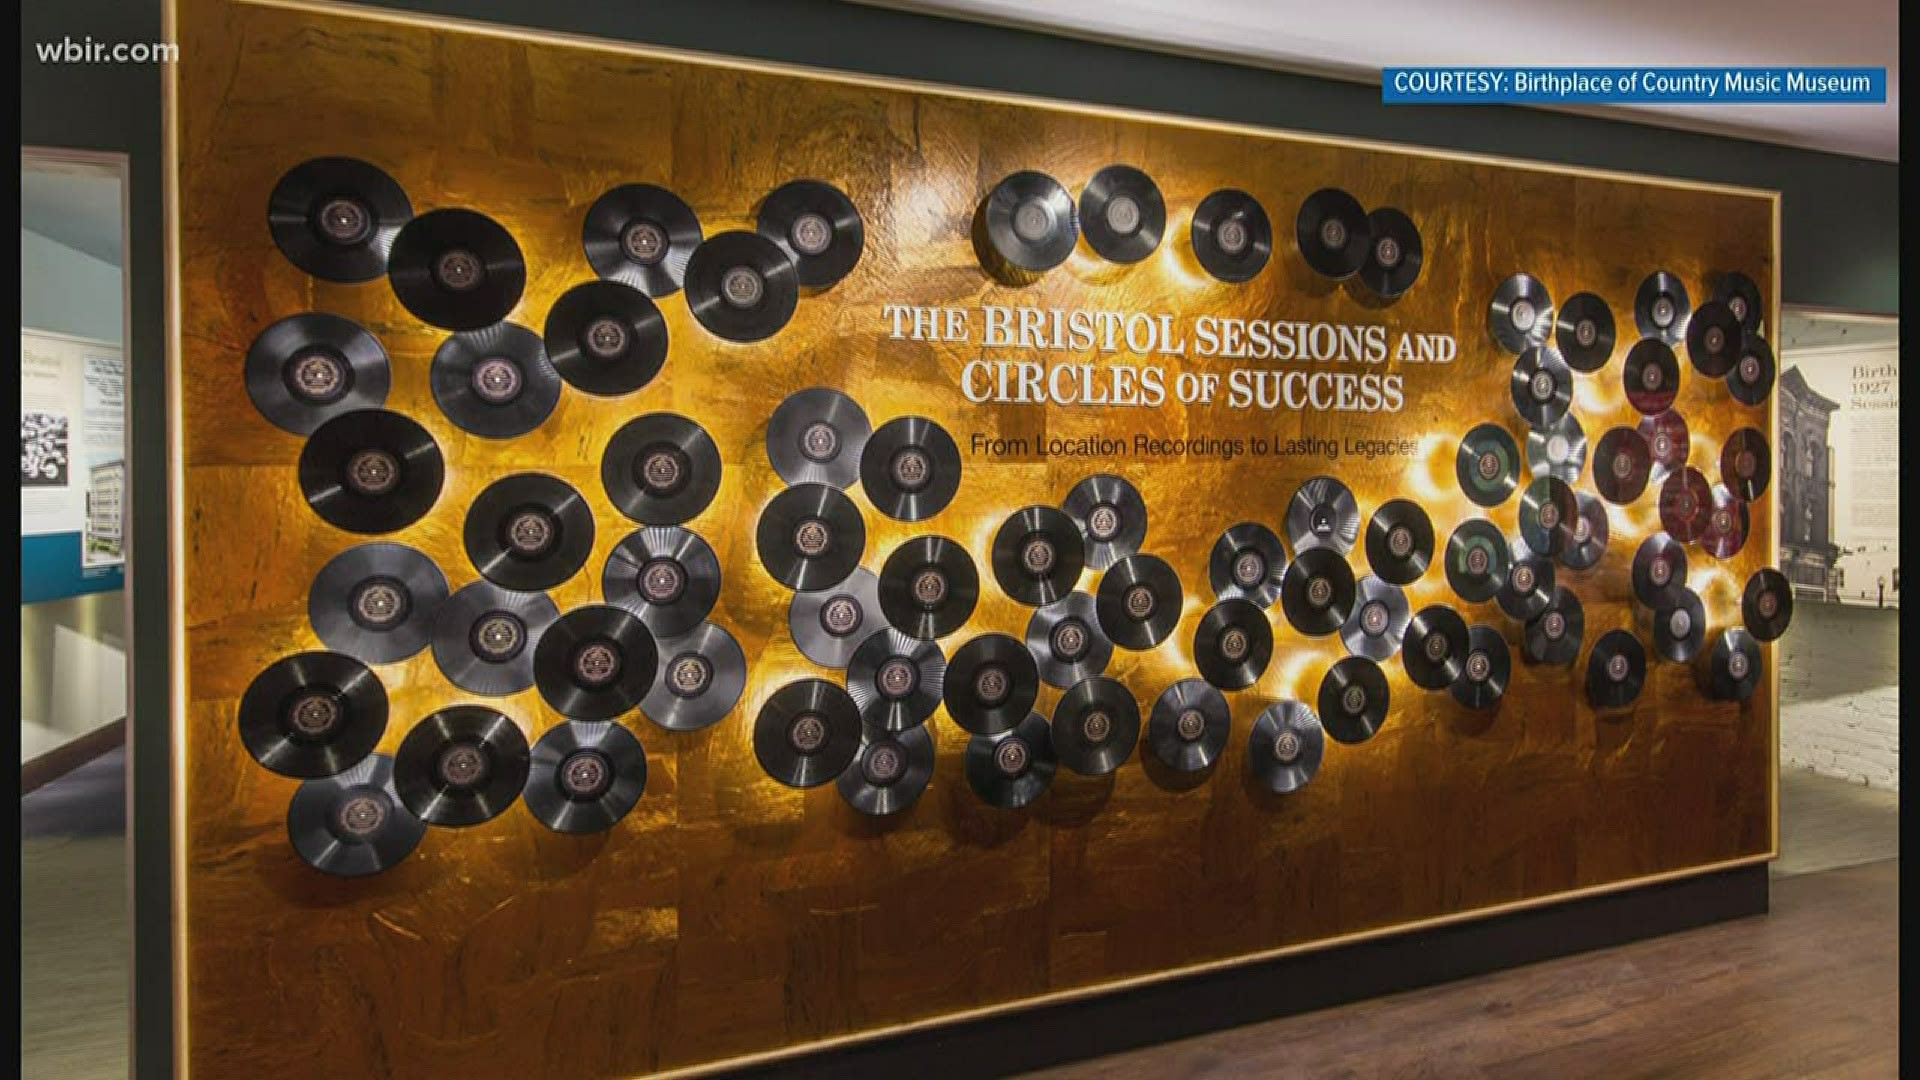 The Birthplace of Country Music Museum in Bristol explores the history, impact, and legacy of the Bristol Sessions.